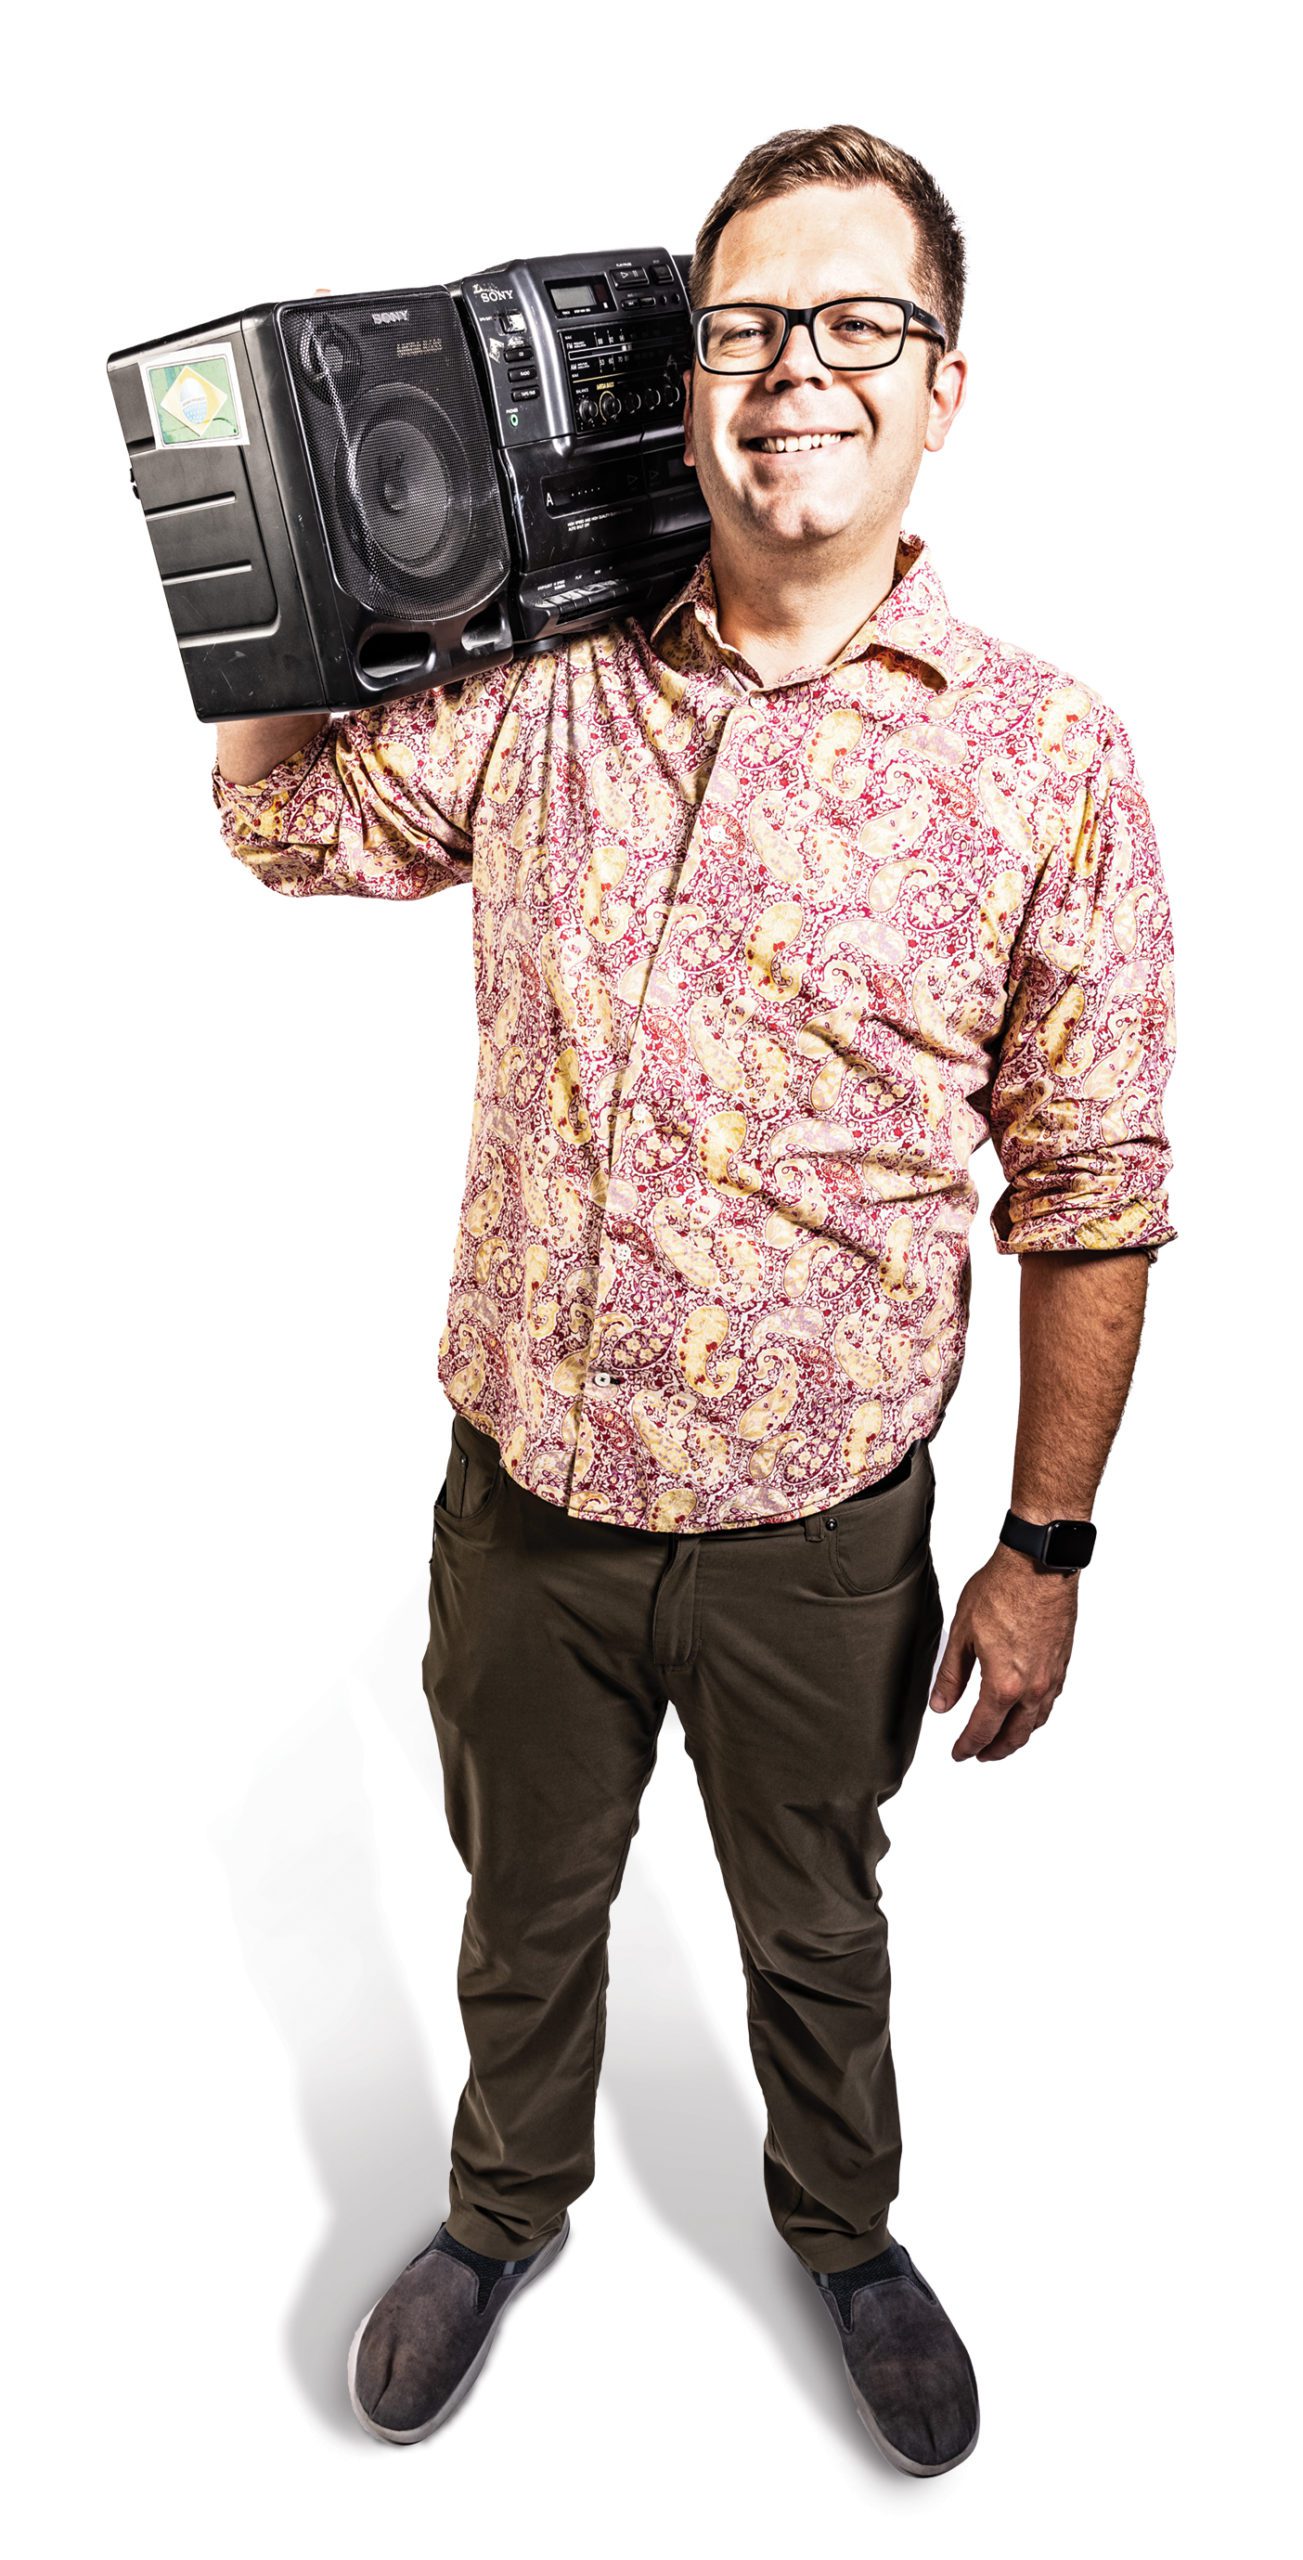 A photo of a man with black glasses and a paisley shirt balances a boom box on his shoulder.